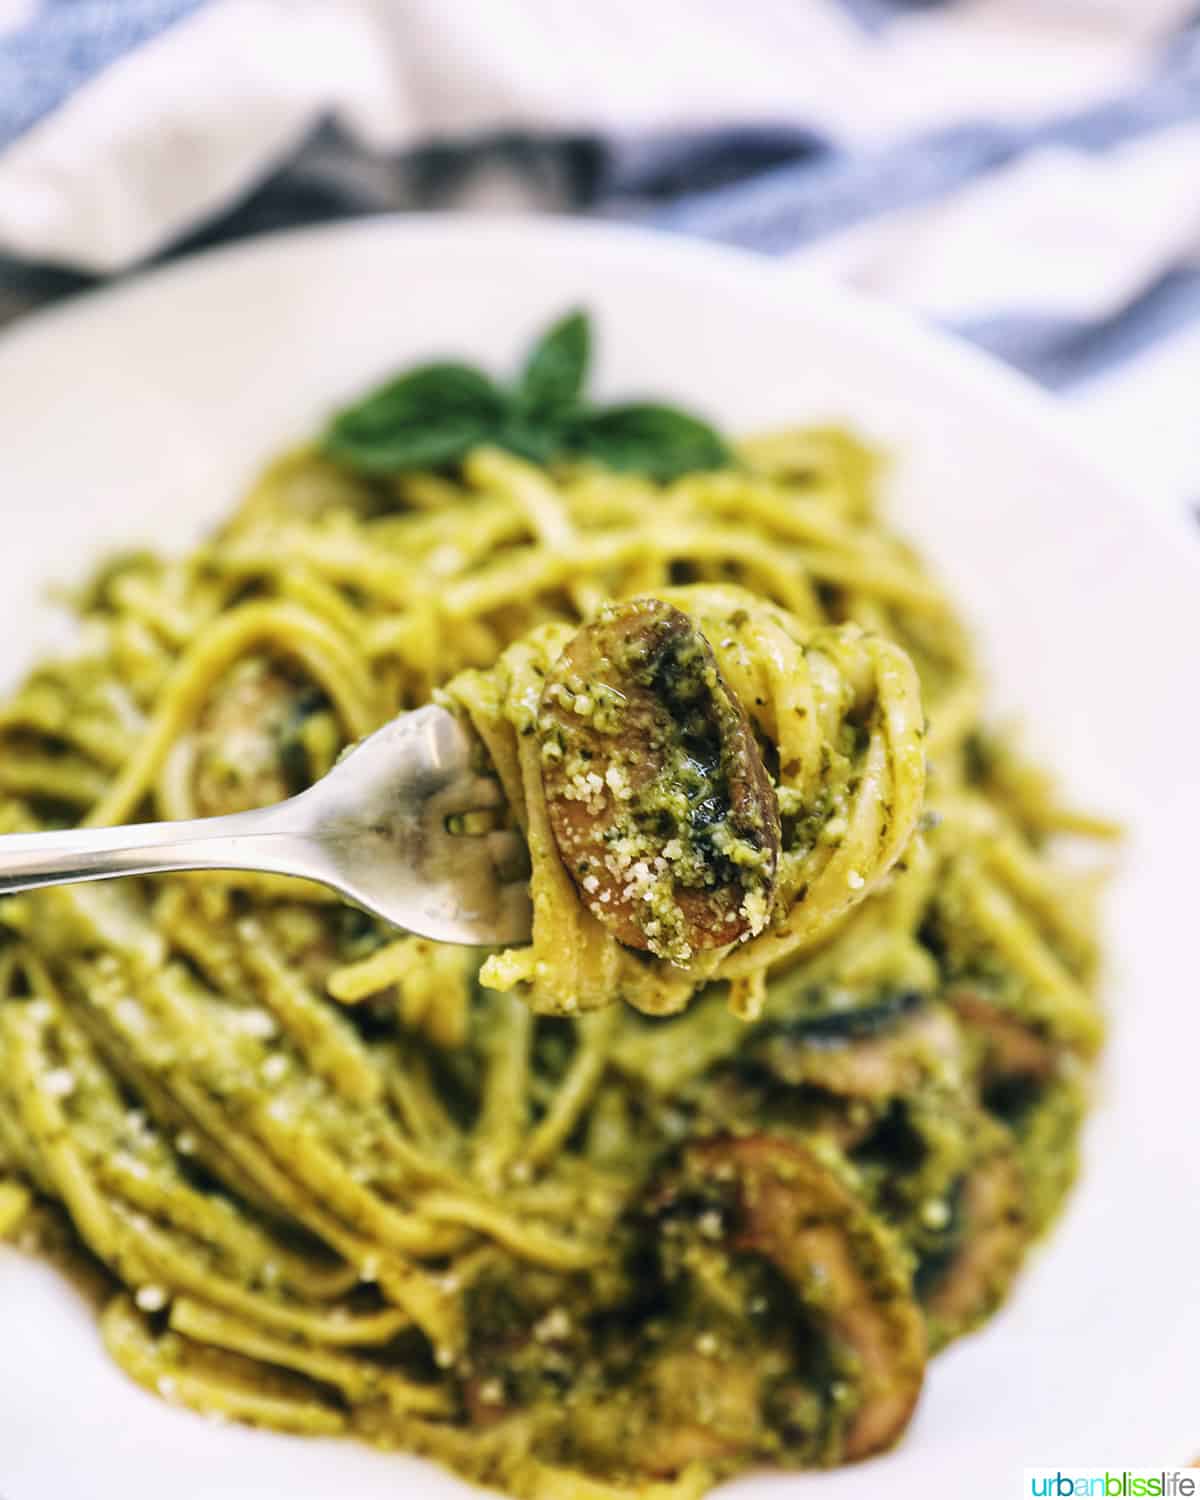 fork twirling linguine pasta in pesto sauce with chopped mushrooms.